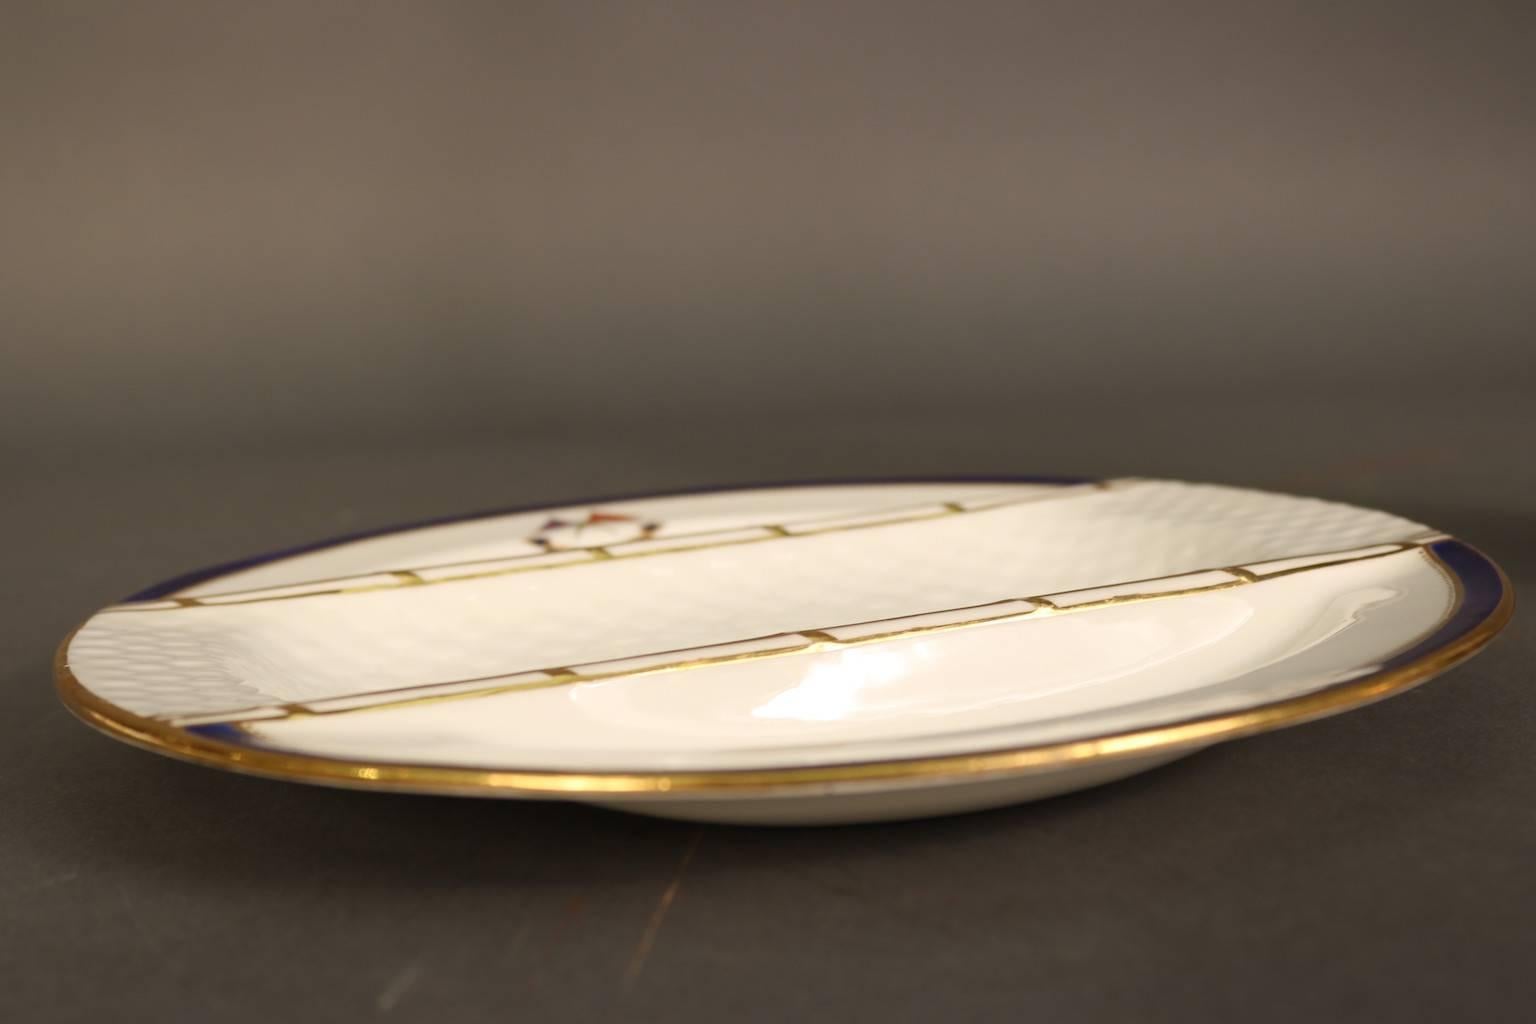 Personal dinnerware made exclusively for J. Pierpont Morgan (1837-1913) for use aboard his personal steam yacht Corsair, built in 1890. This 10” Asparagus Plate by Minton's has the J. Pierpont Morgan signature navy blue trim with gold accents.